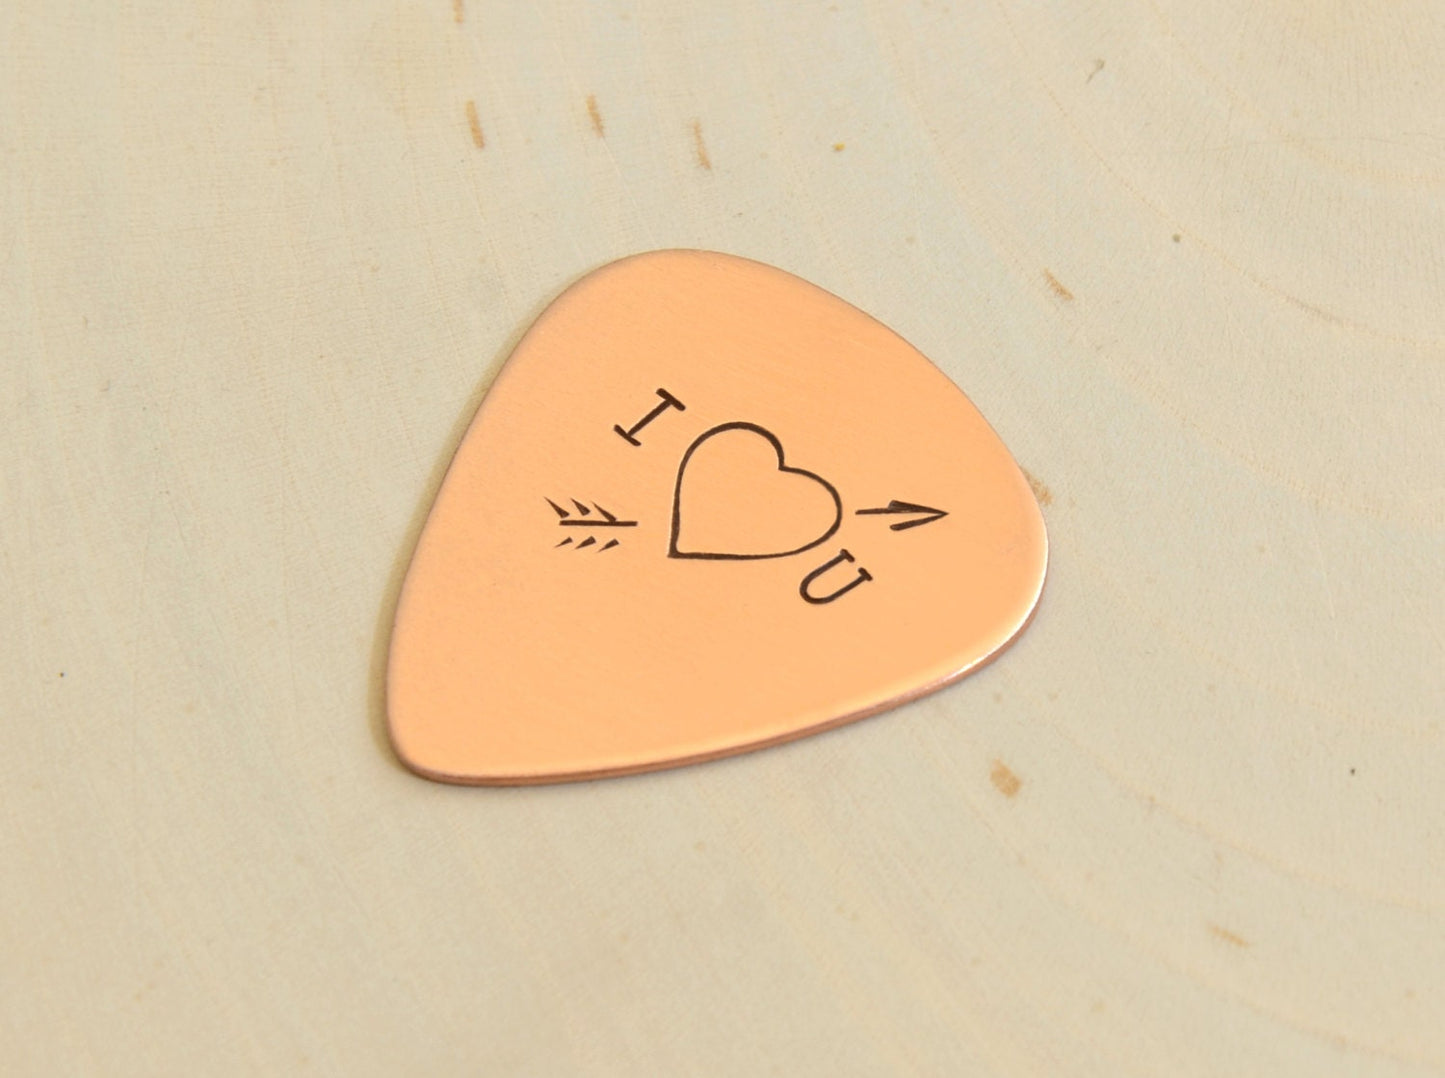 I love you copper guitar pick with Cupid's arrow of love straight through the heart